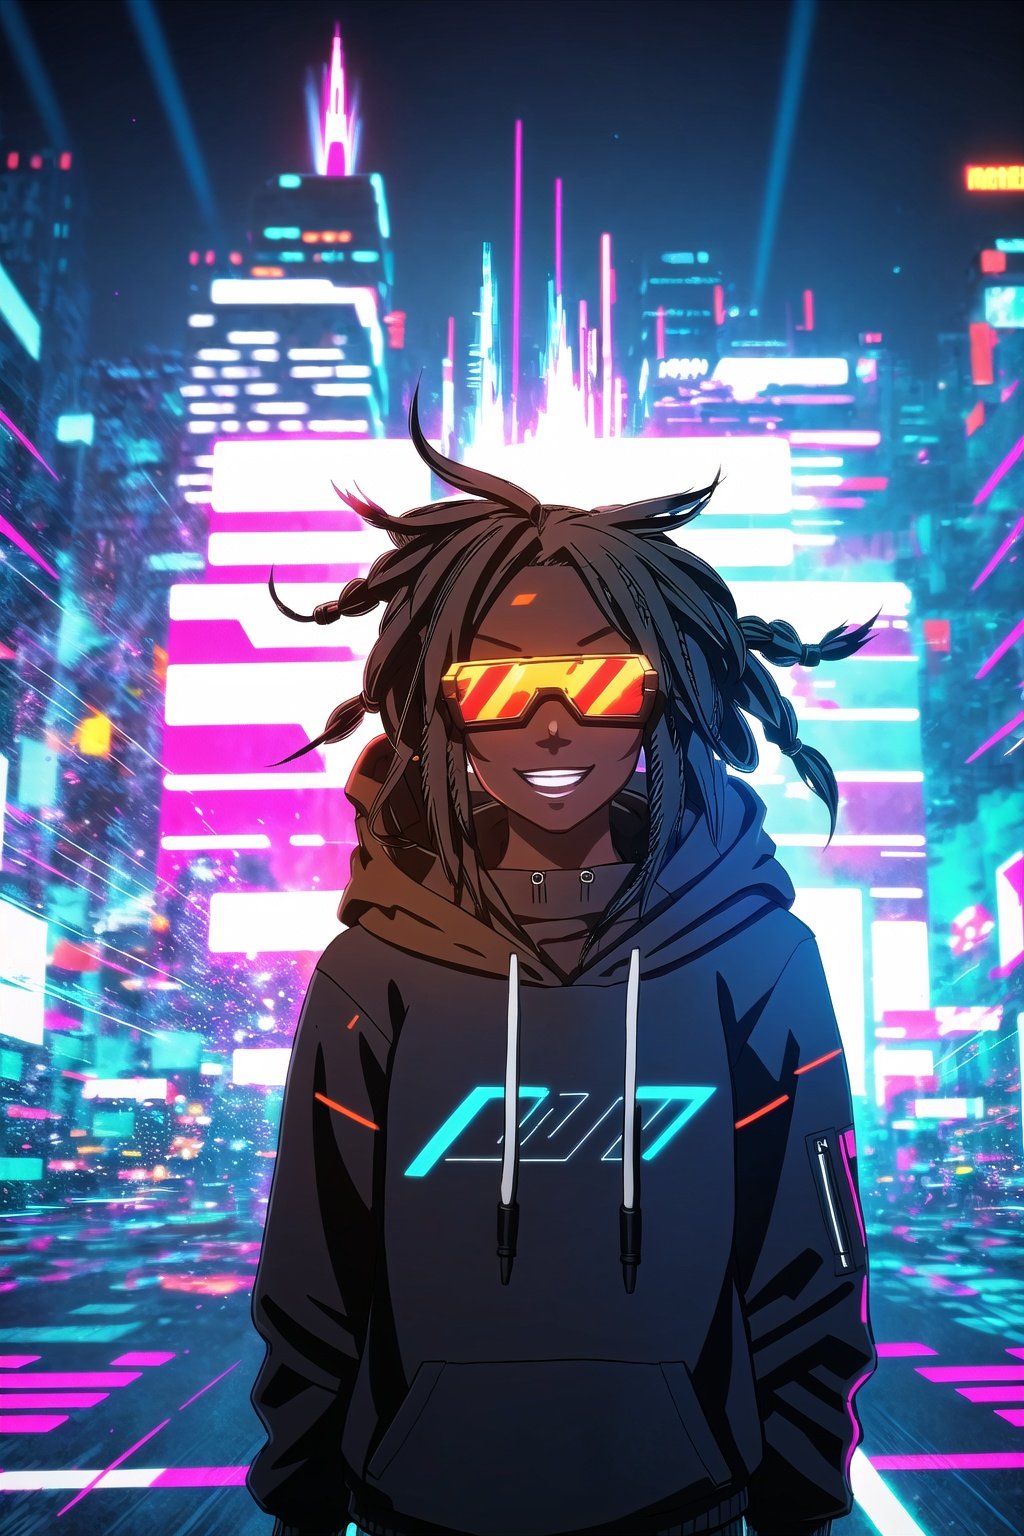 guiltys, huge smile, a girl, pixel glasses on, gray dreads hair, hoody on, upper body, deal with it, dj theme, synthwave theme, (bokeh:1.1), depth of field, style of Alena Aenami, tracers, vfx, splashes, lightning, light particles, electric, white background